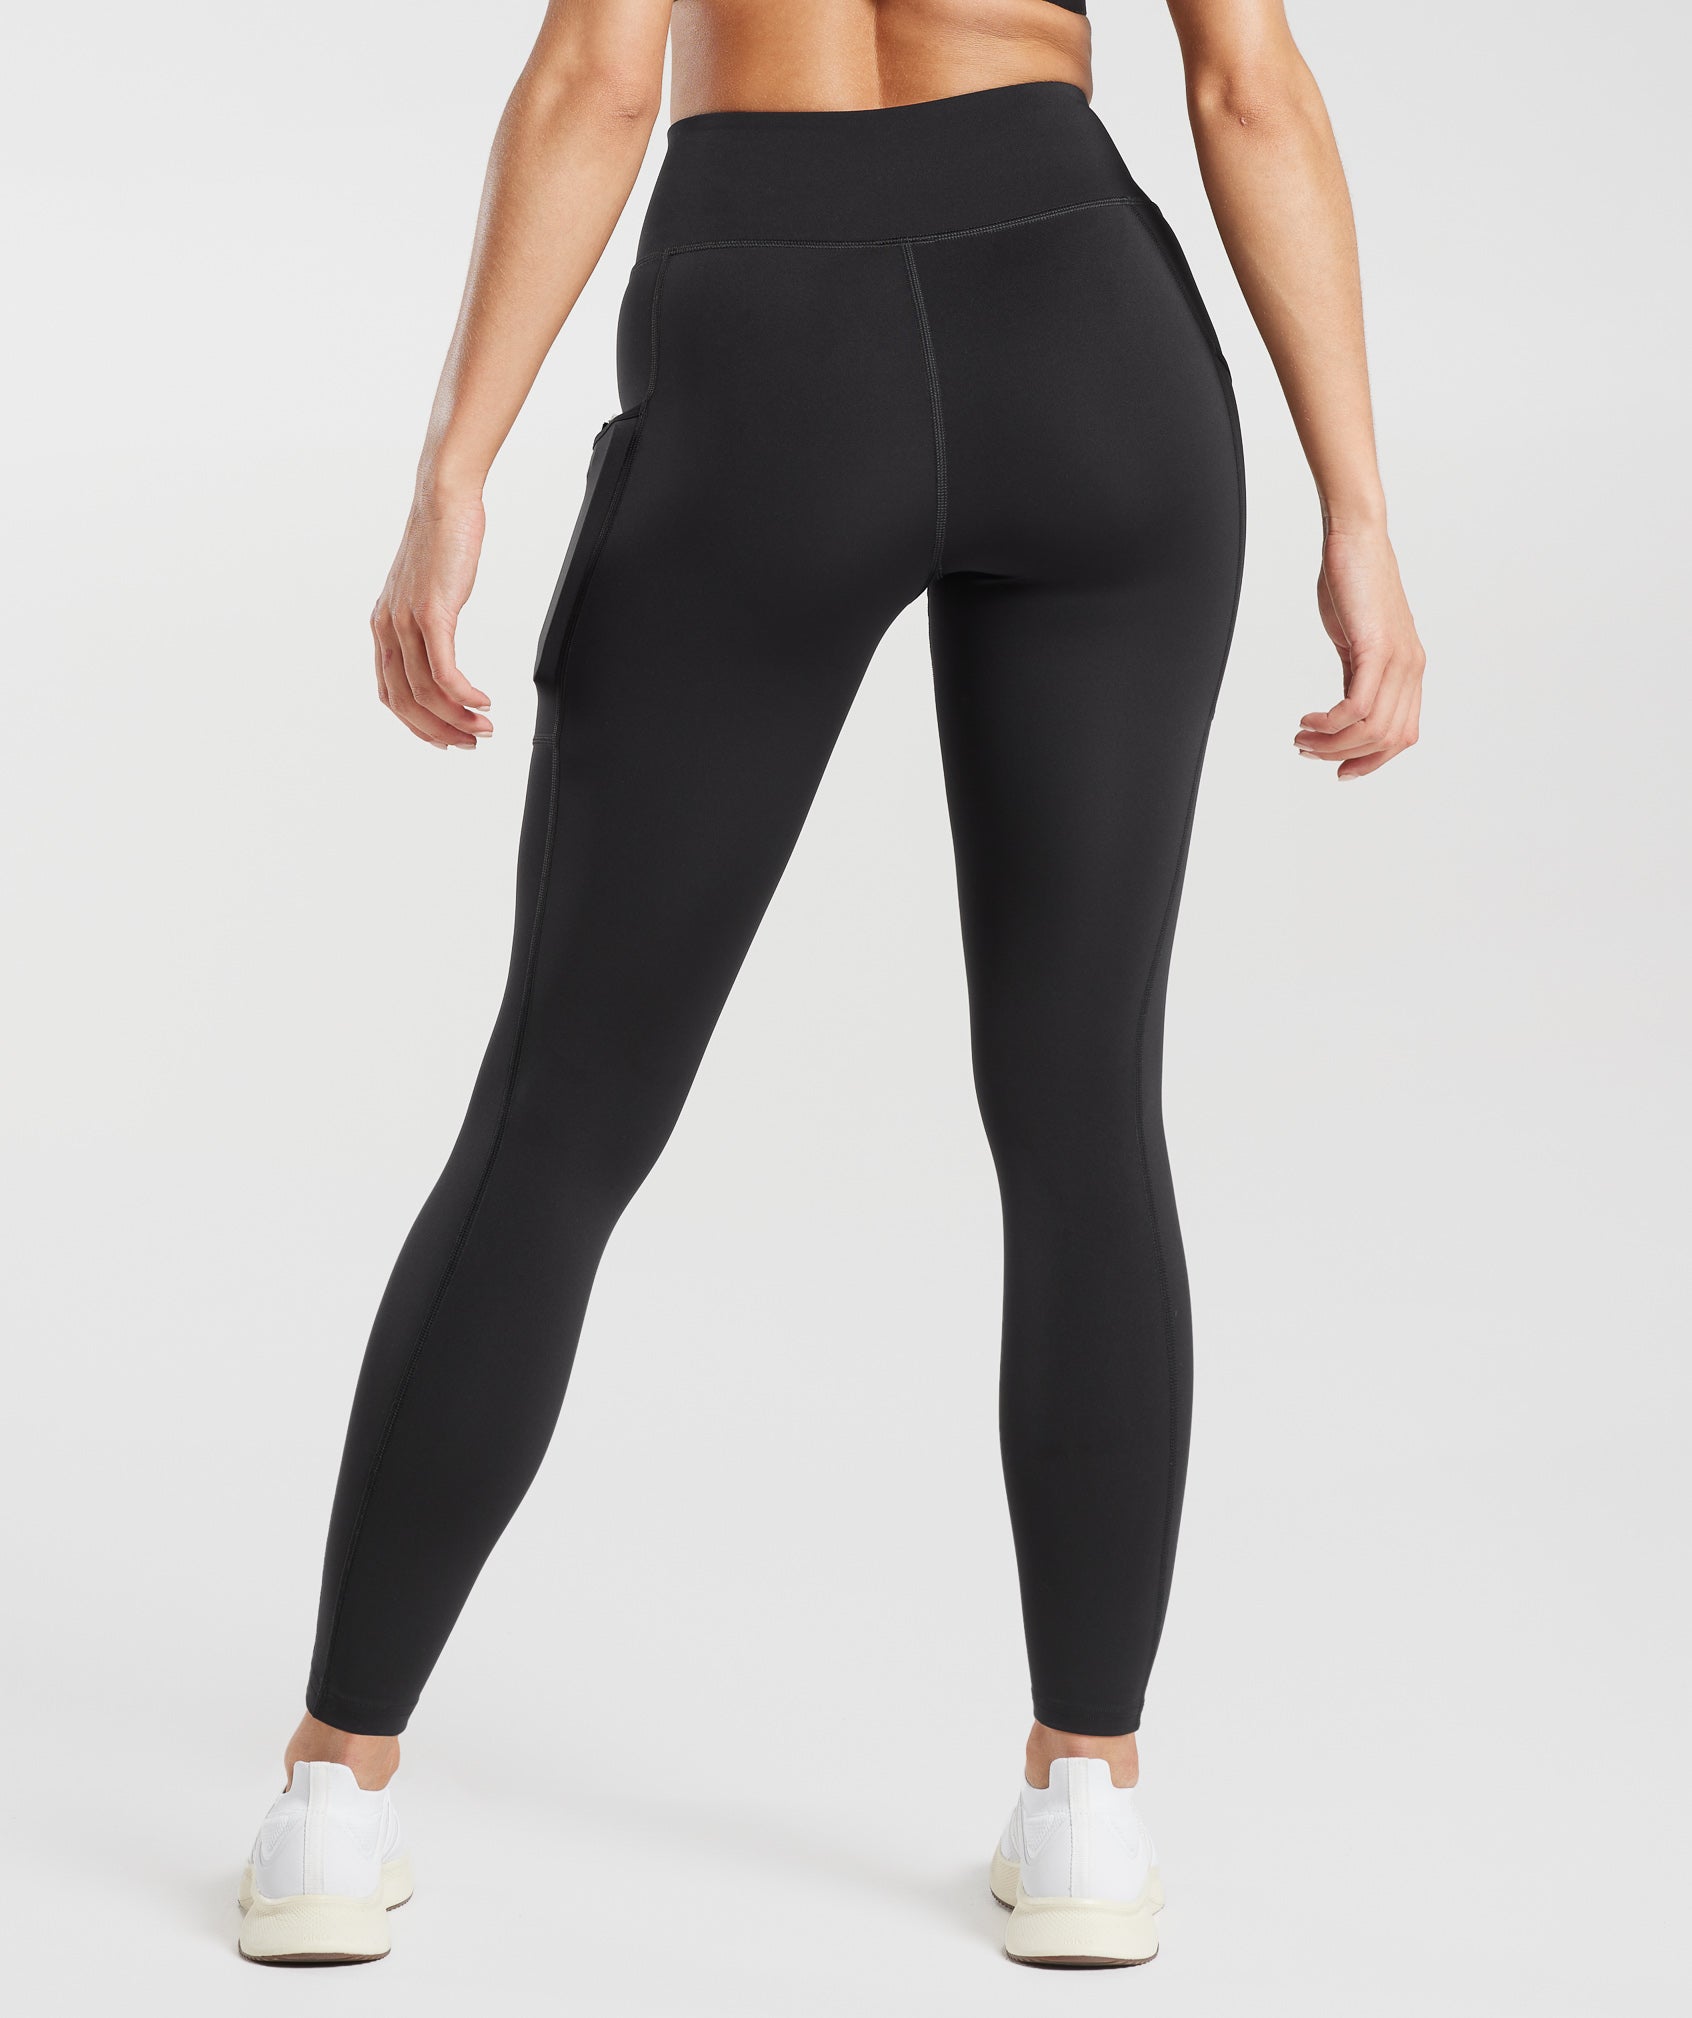 The IG Worthy Gymshark Women's Leggings And Tops We Can't Get Over -  Society19